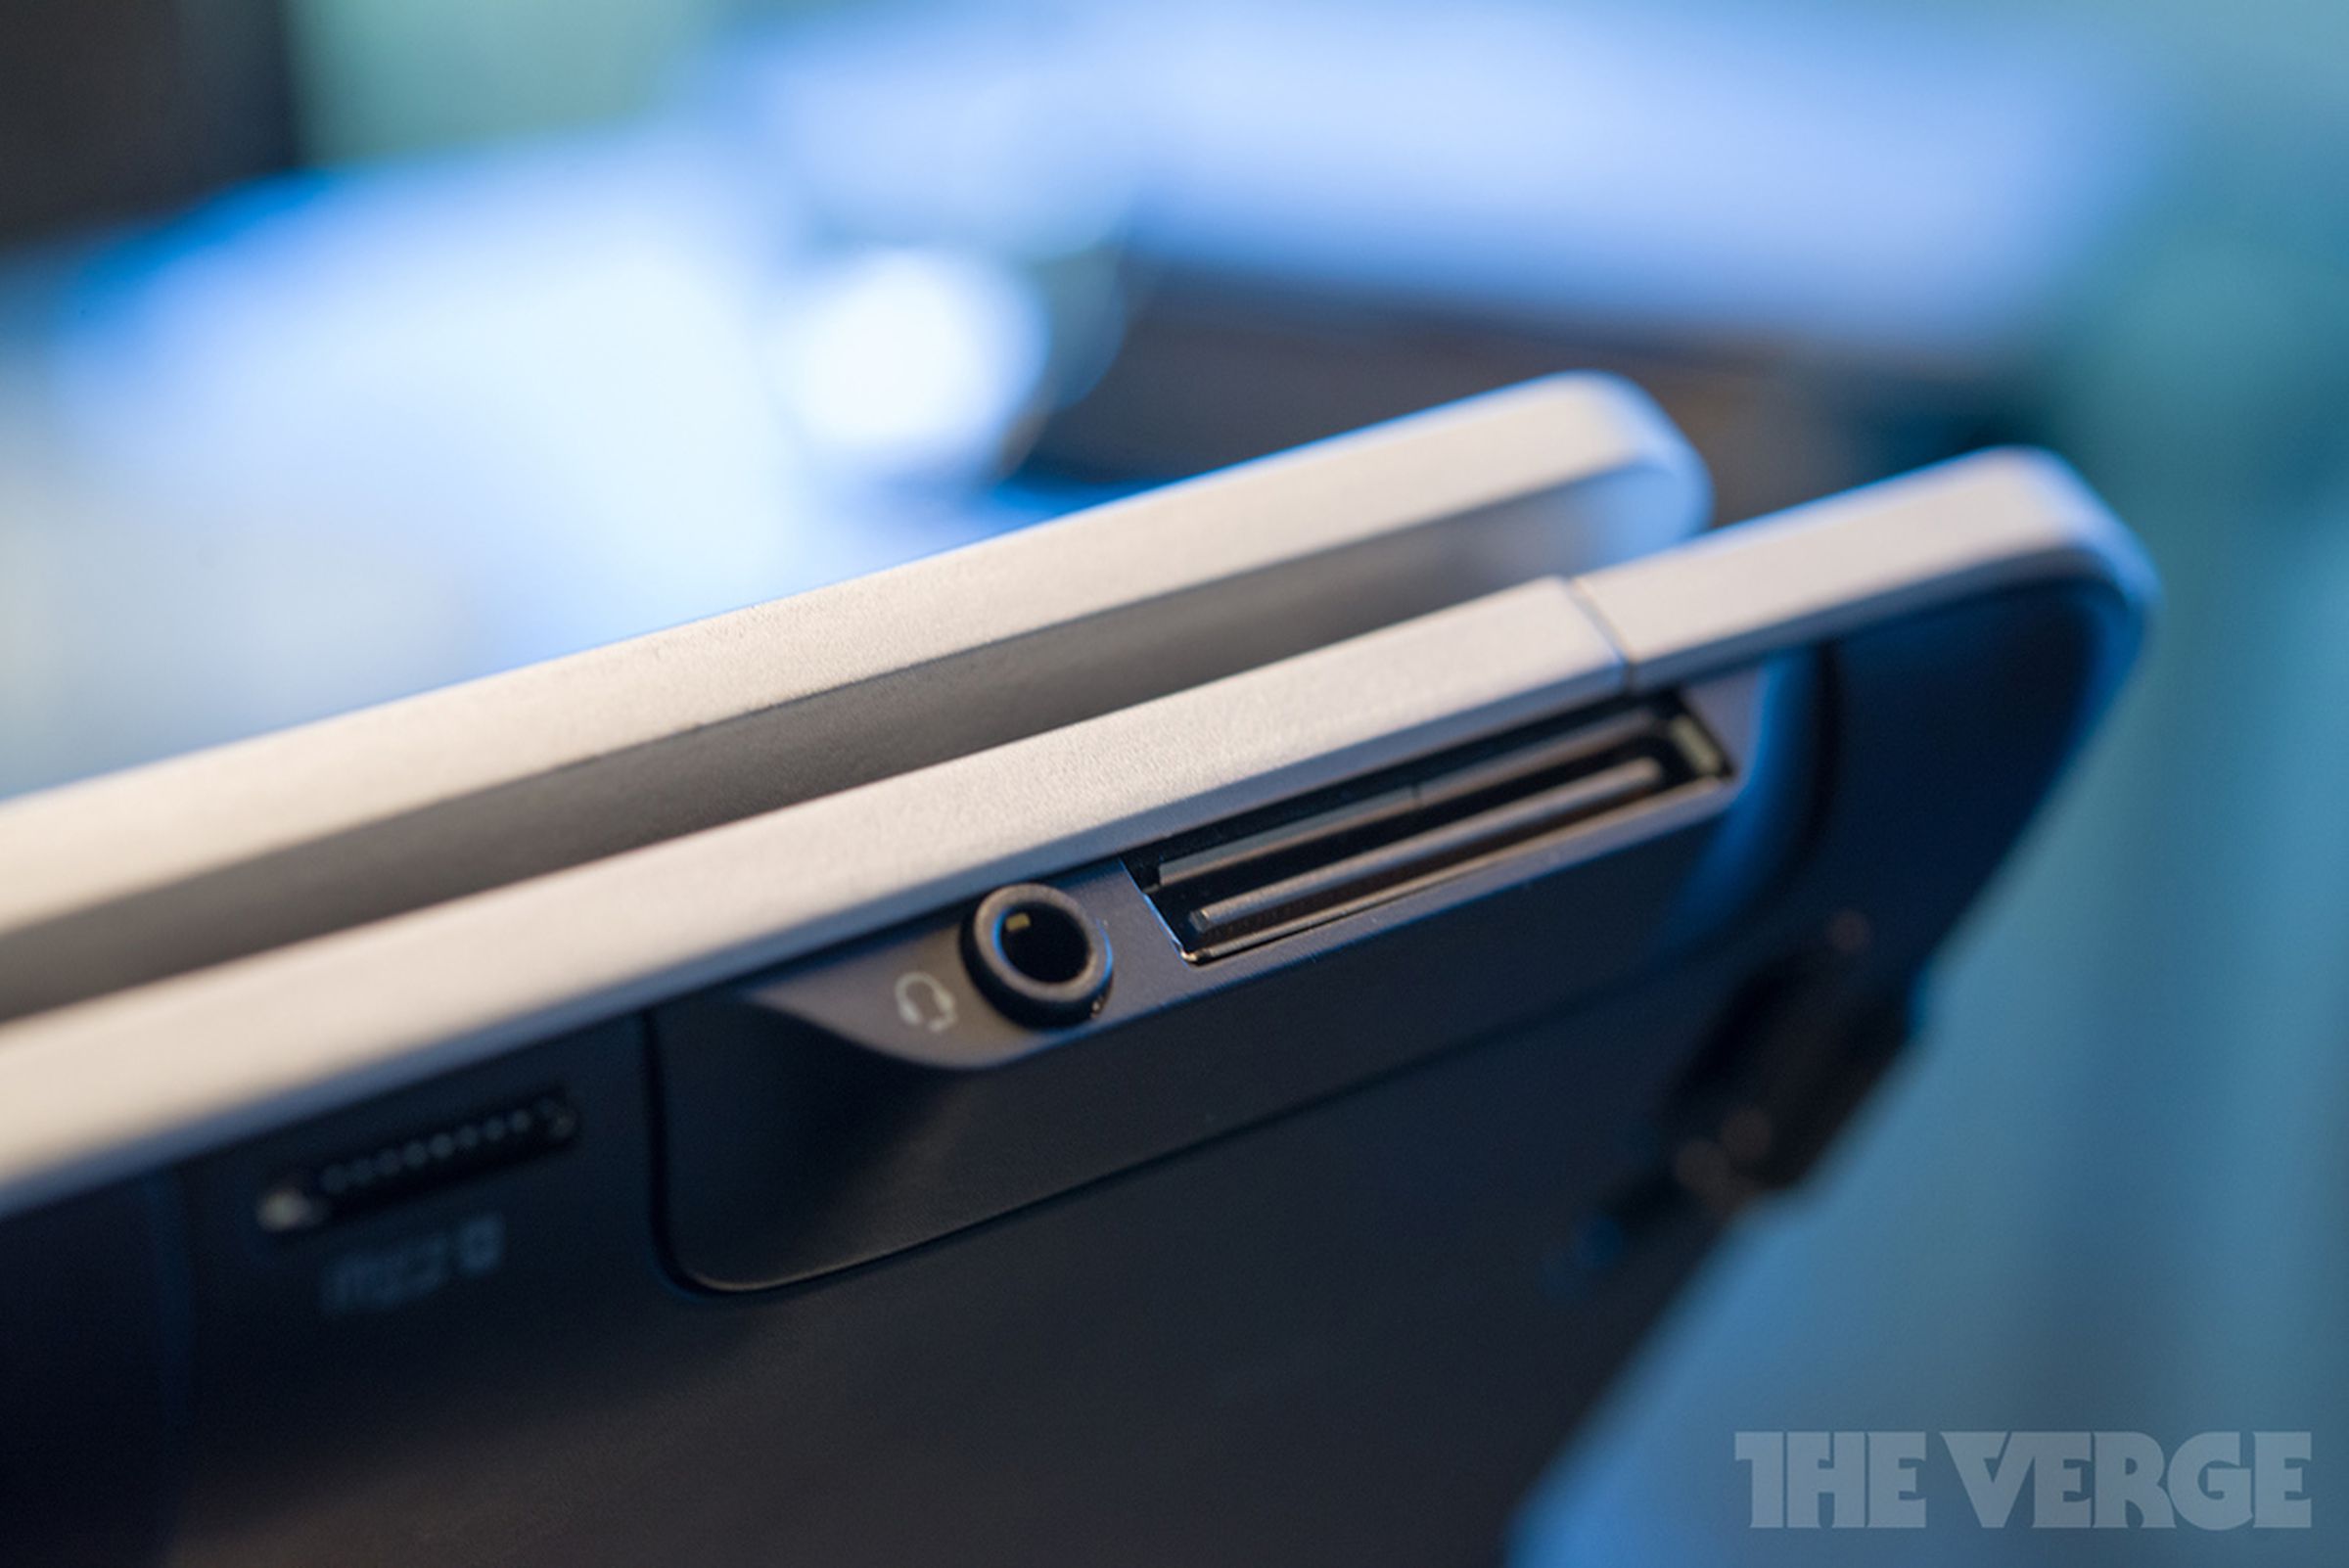 HP Elitebook Revolve hands-on and press pictures